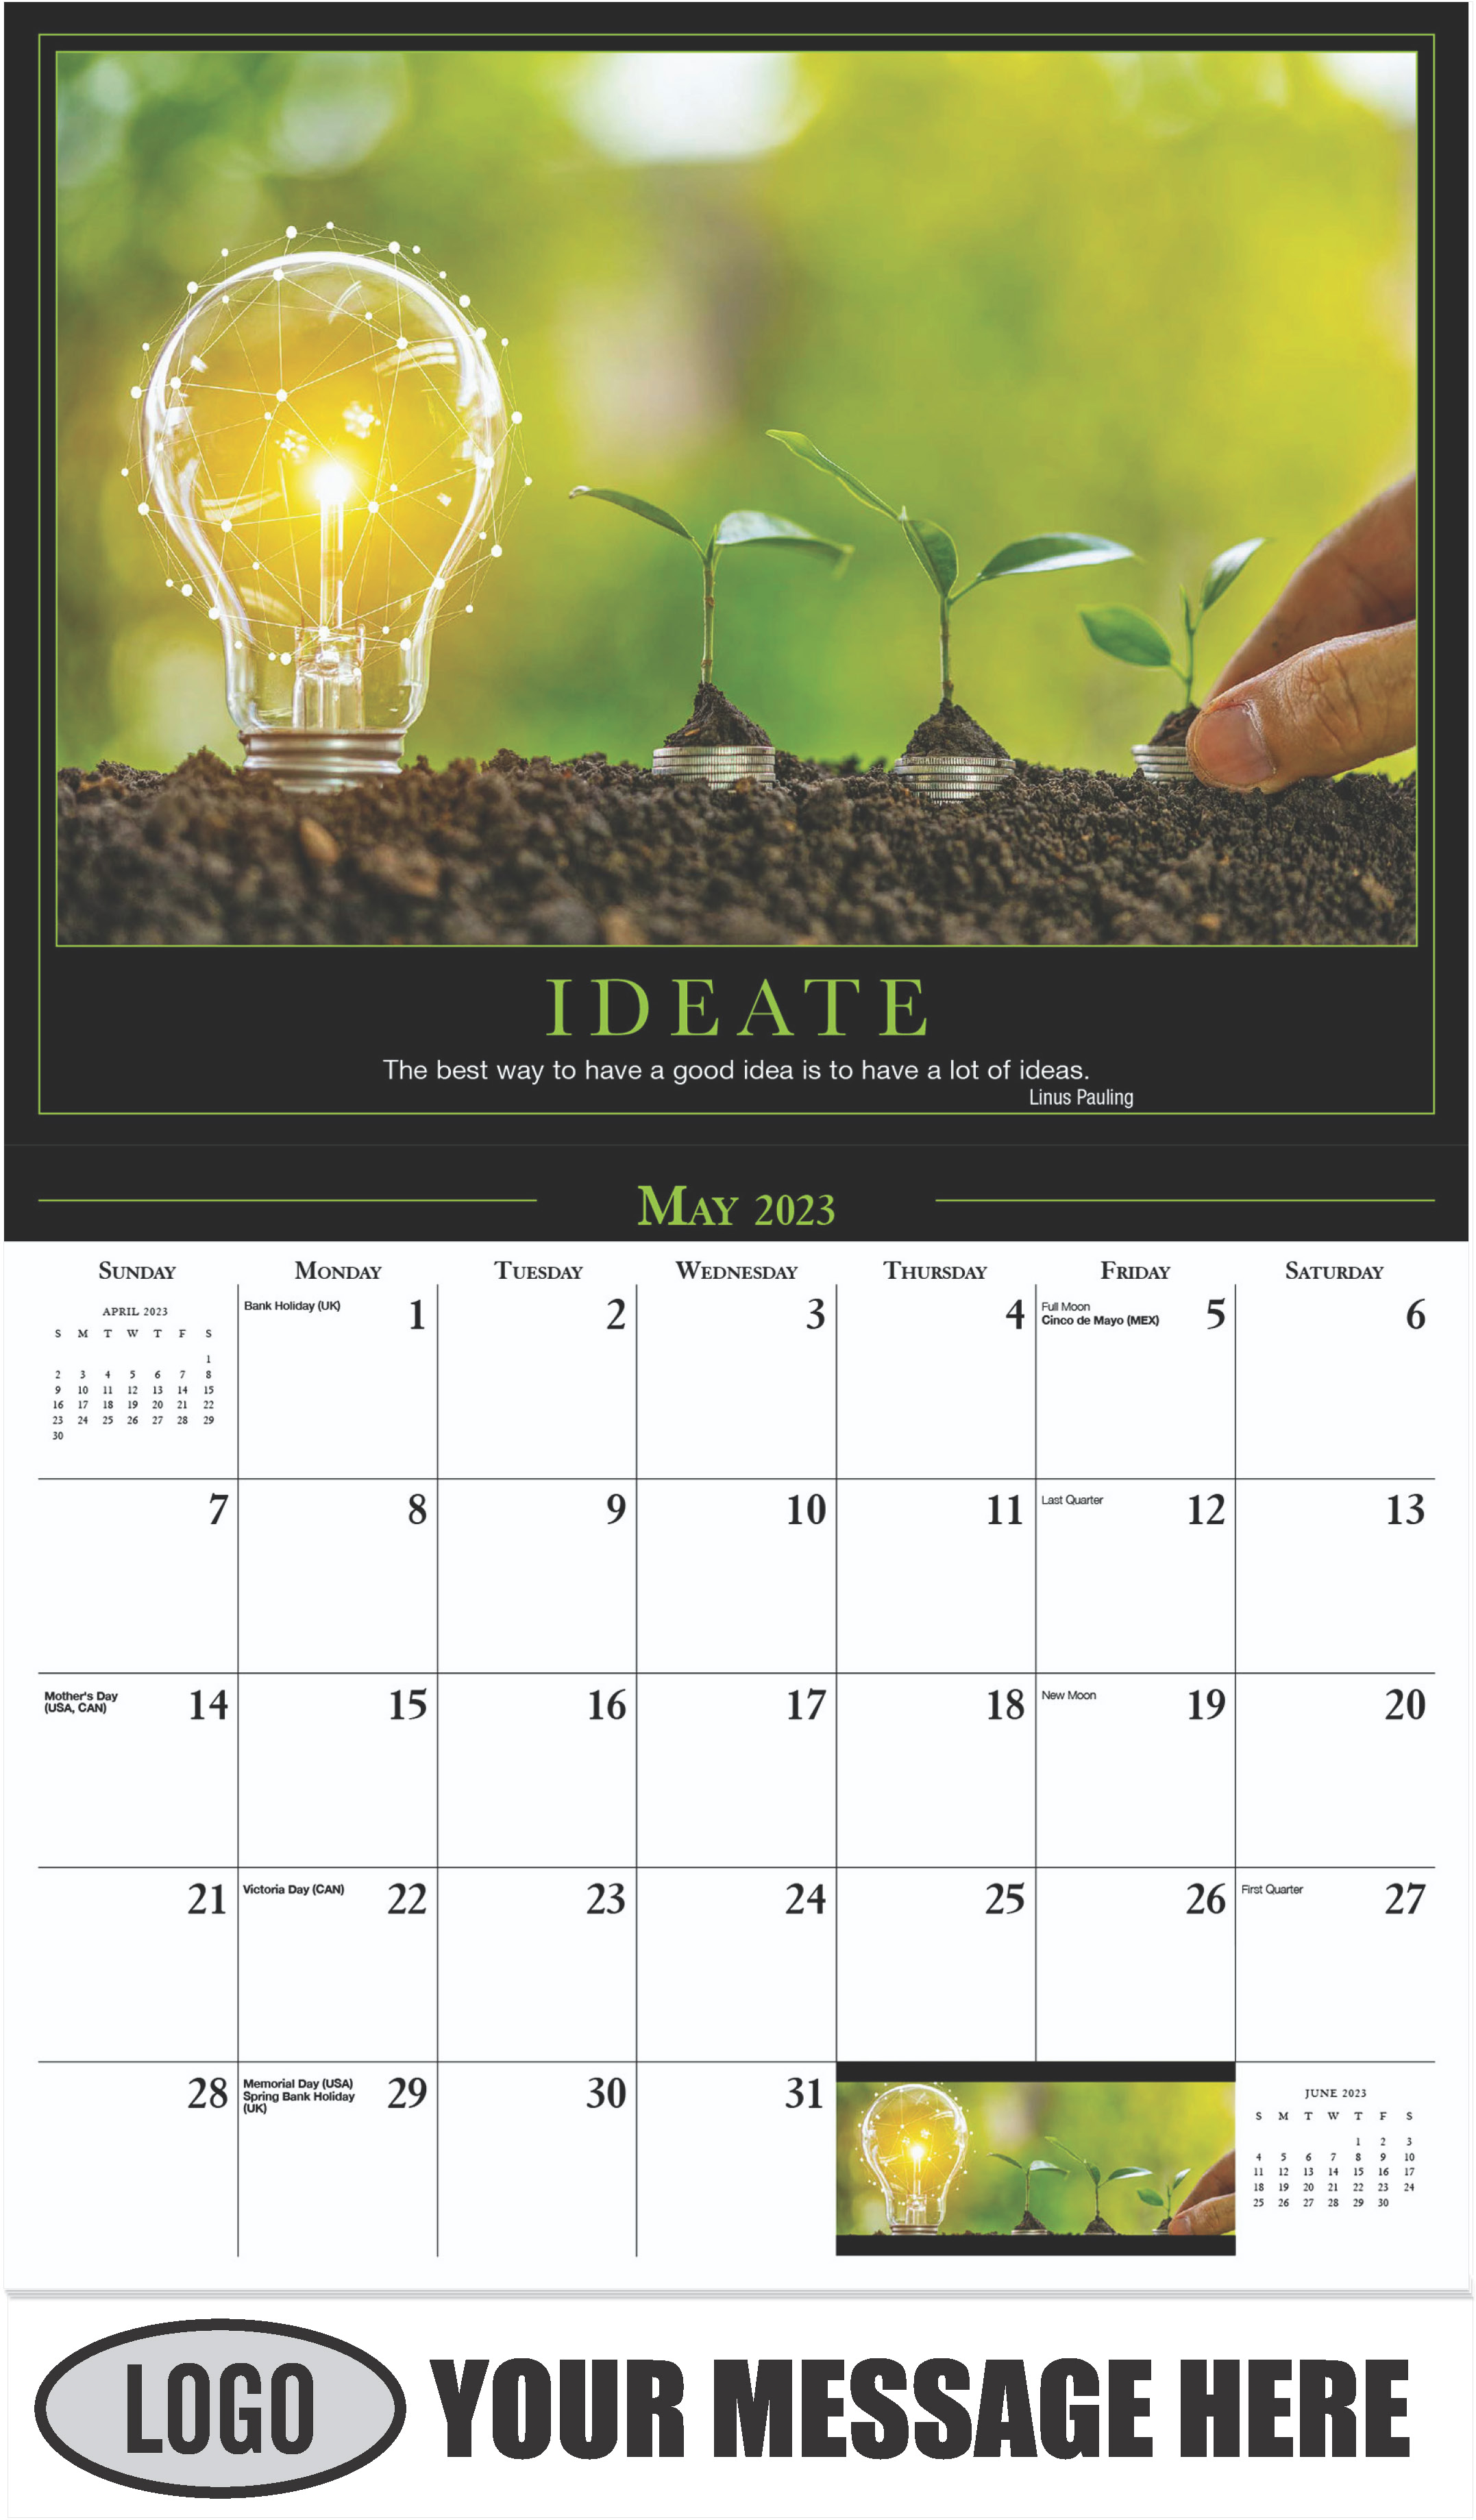 IDEATE ''The best way to have a good idea is to have a lot of ideas.'' - Linus Pauling - May - Motivation 2023 Promotional Calendar